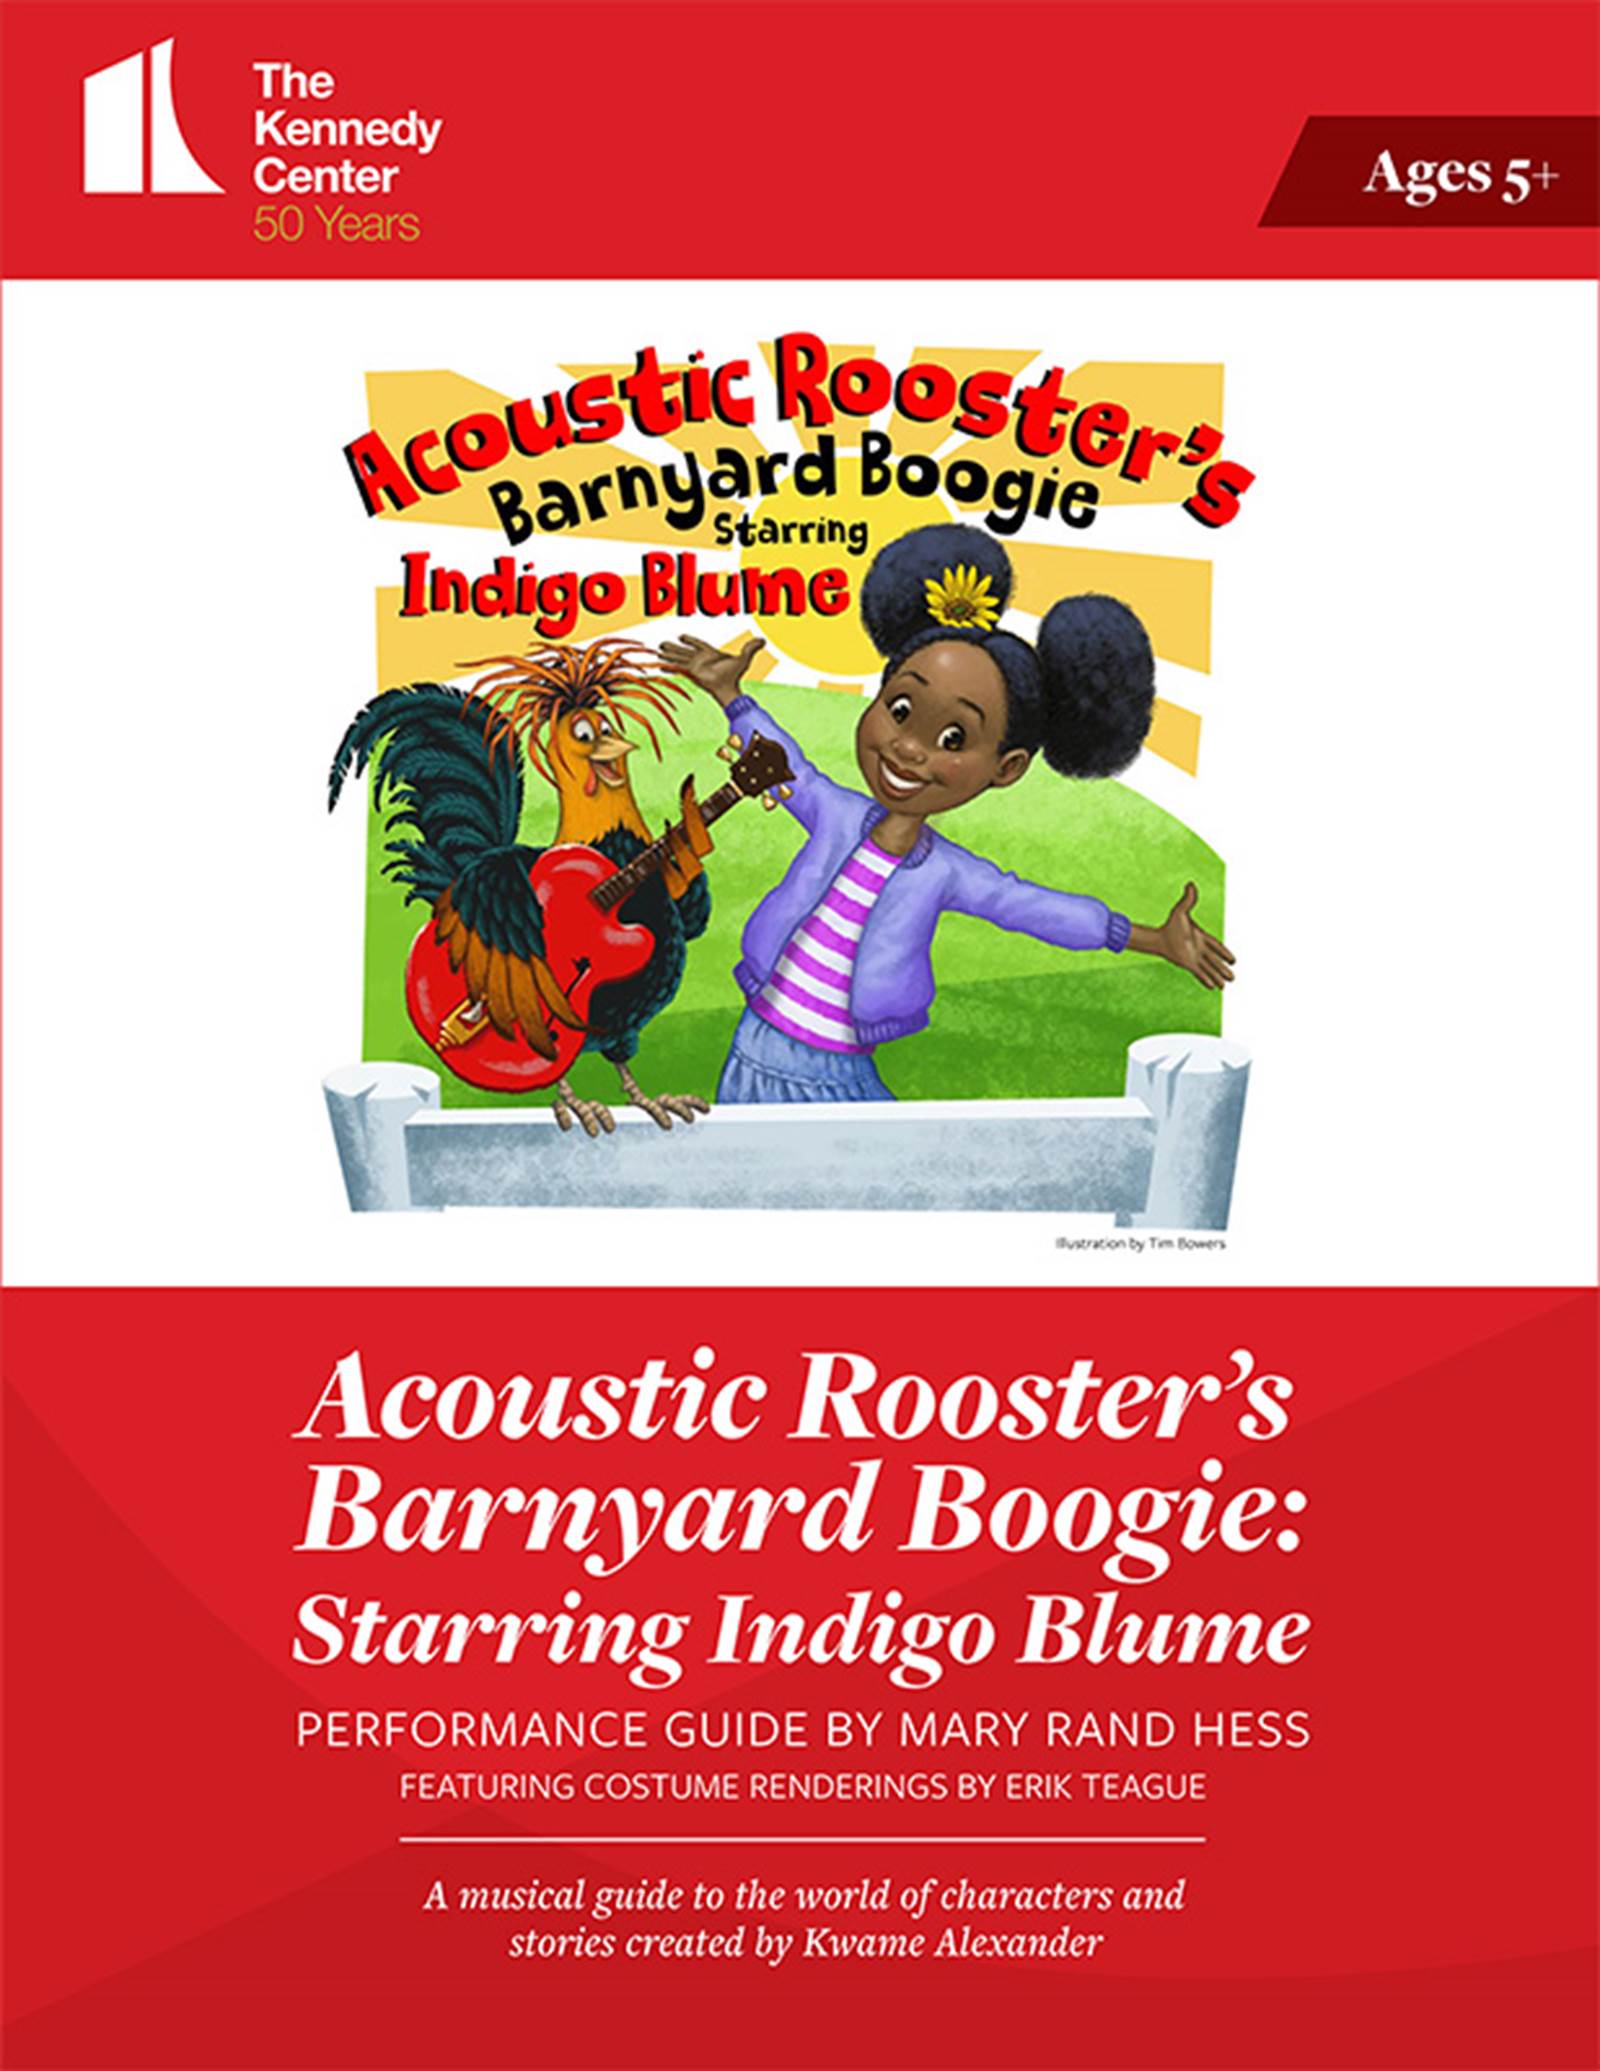 Acoustic Rooster’s Barnyard Boogie: Starring Indigo Blume Performance Guide